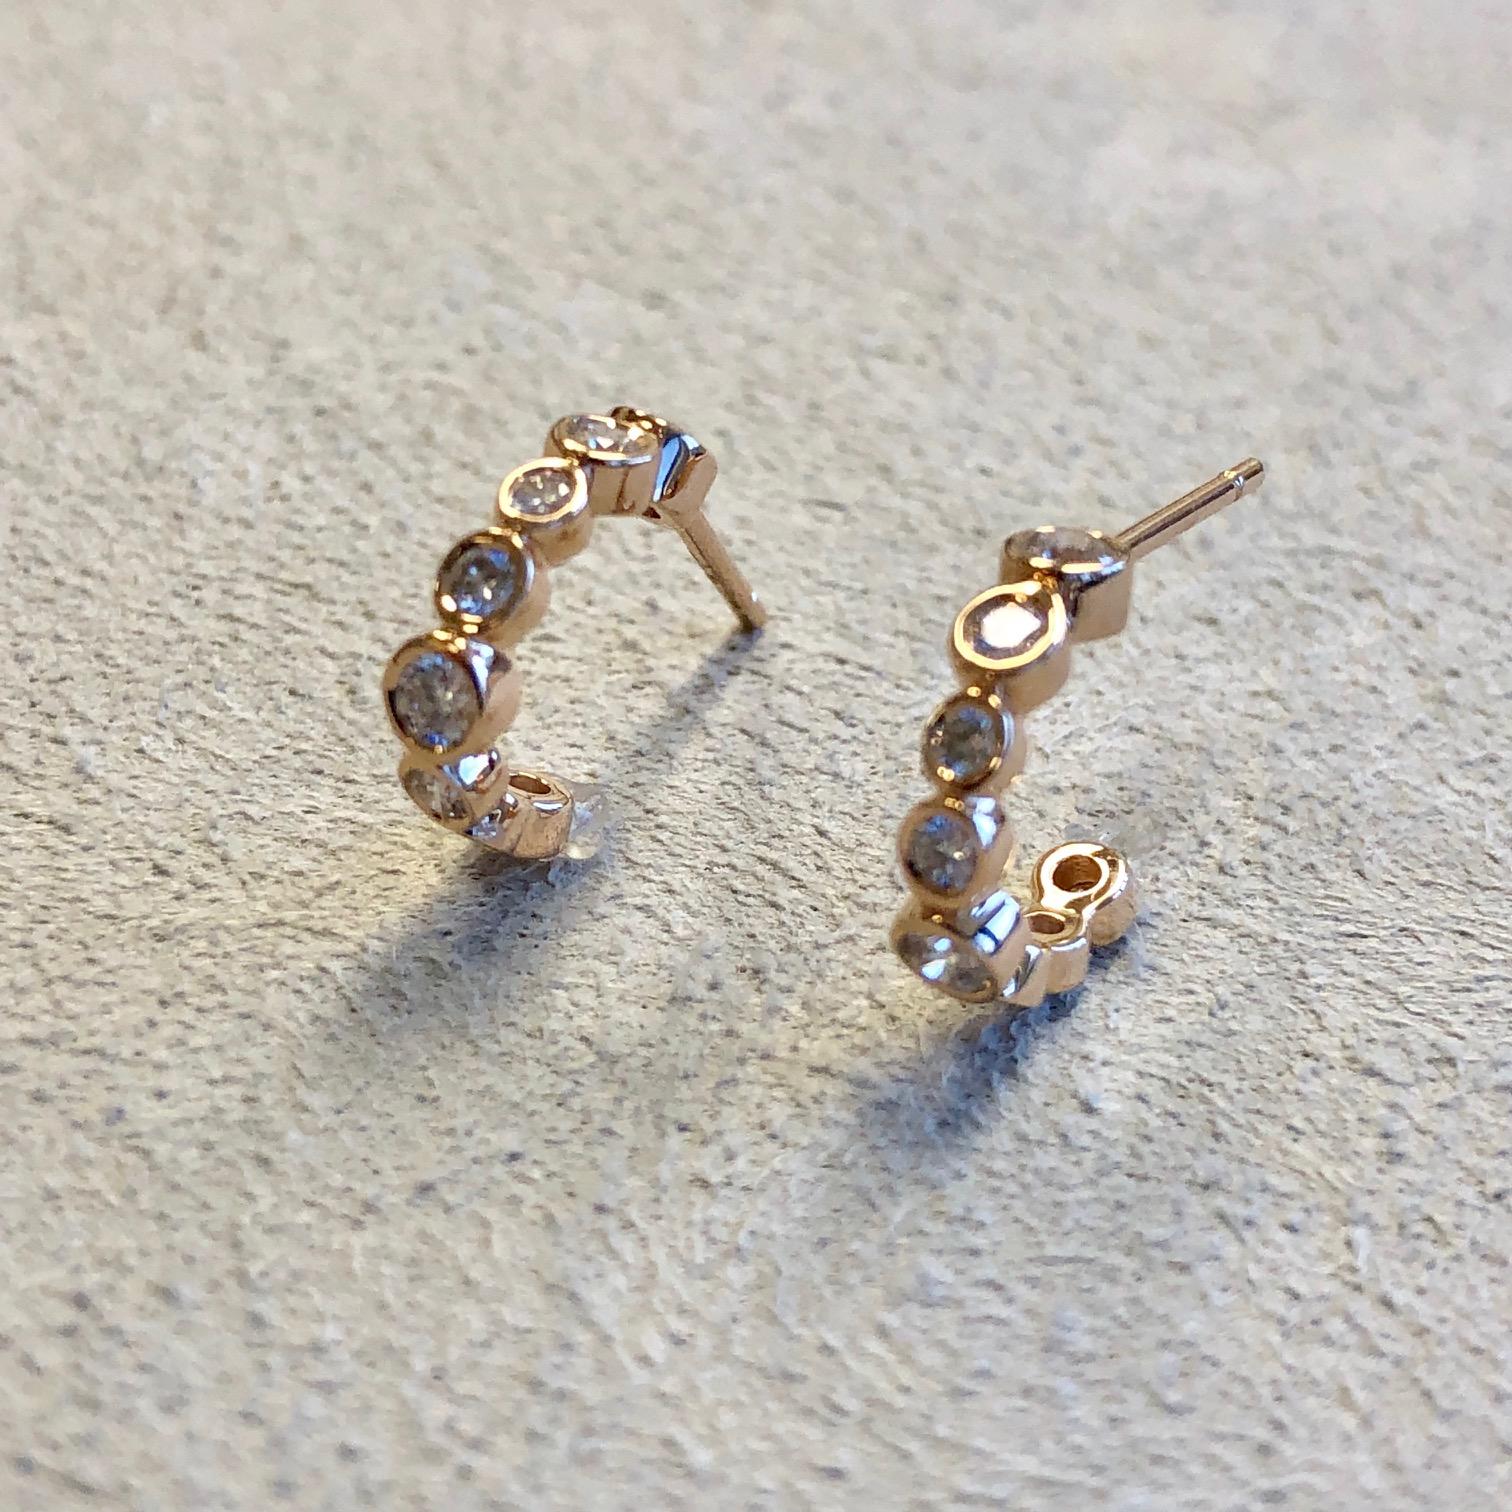 Created in 18 karat rose gold
Diamonds 0.50 ct approx
18 karat rose gold butterfly backs

These elegant Candy Blue Topaz & Diamond Earrings from our collection feature 0.50 carats of diamonds, set in a luxurious 18 karat rose gold. Showcasing a